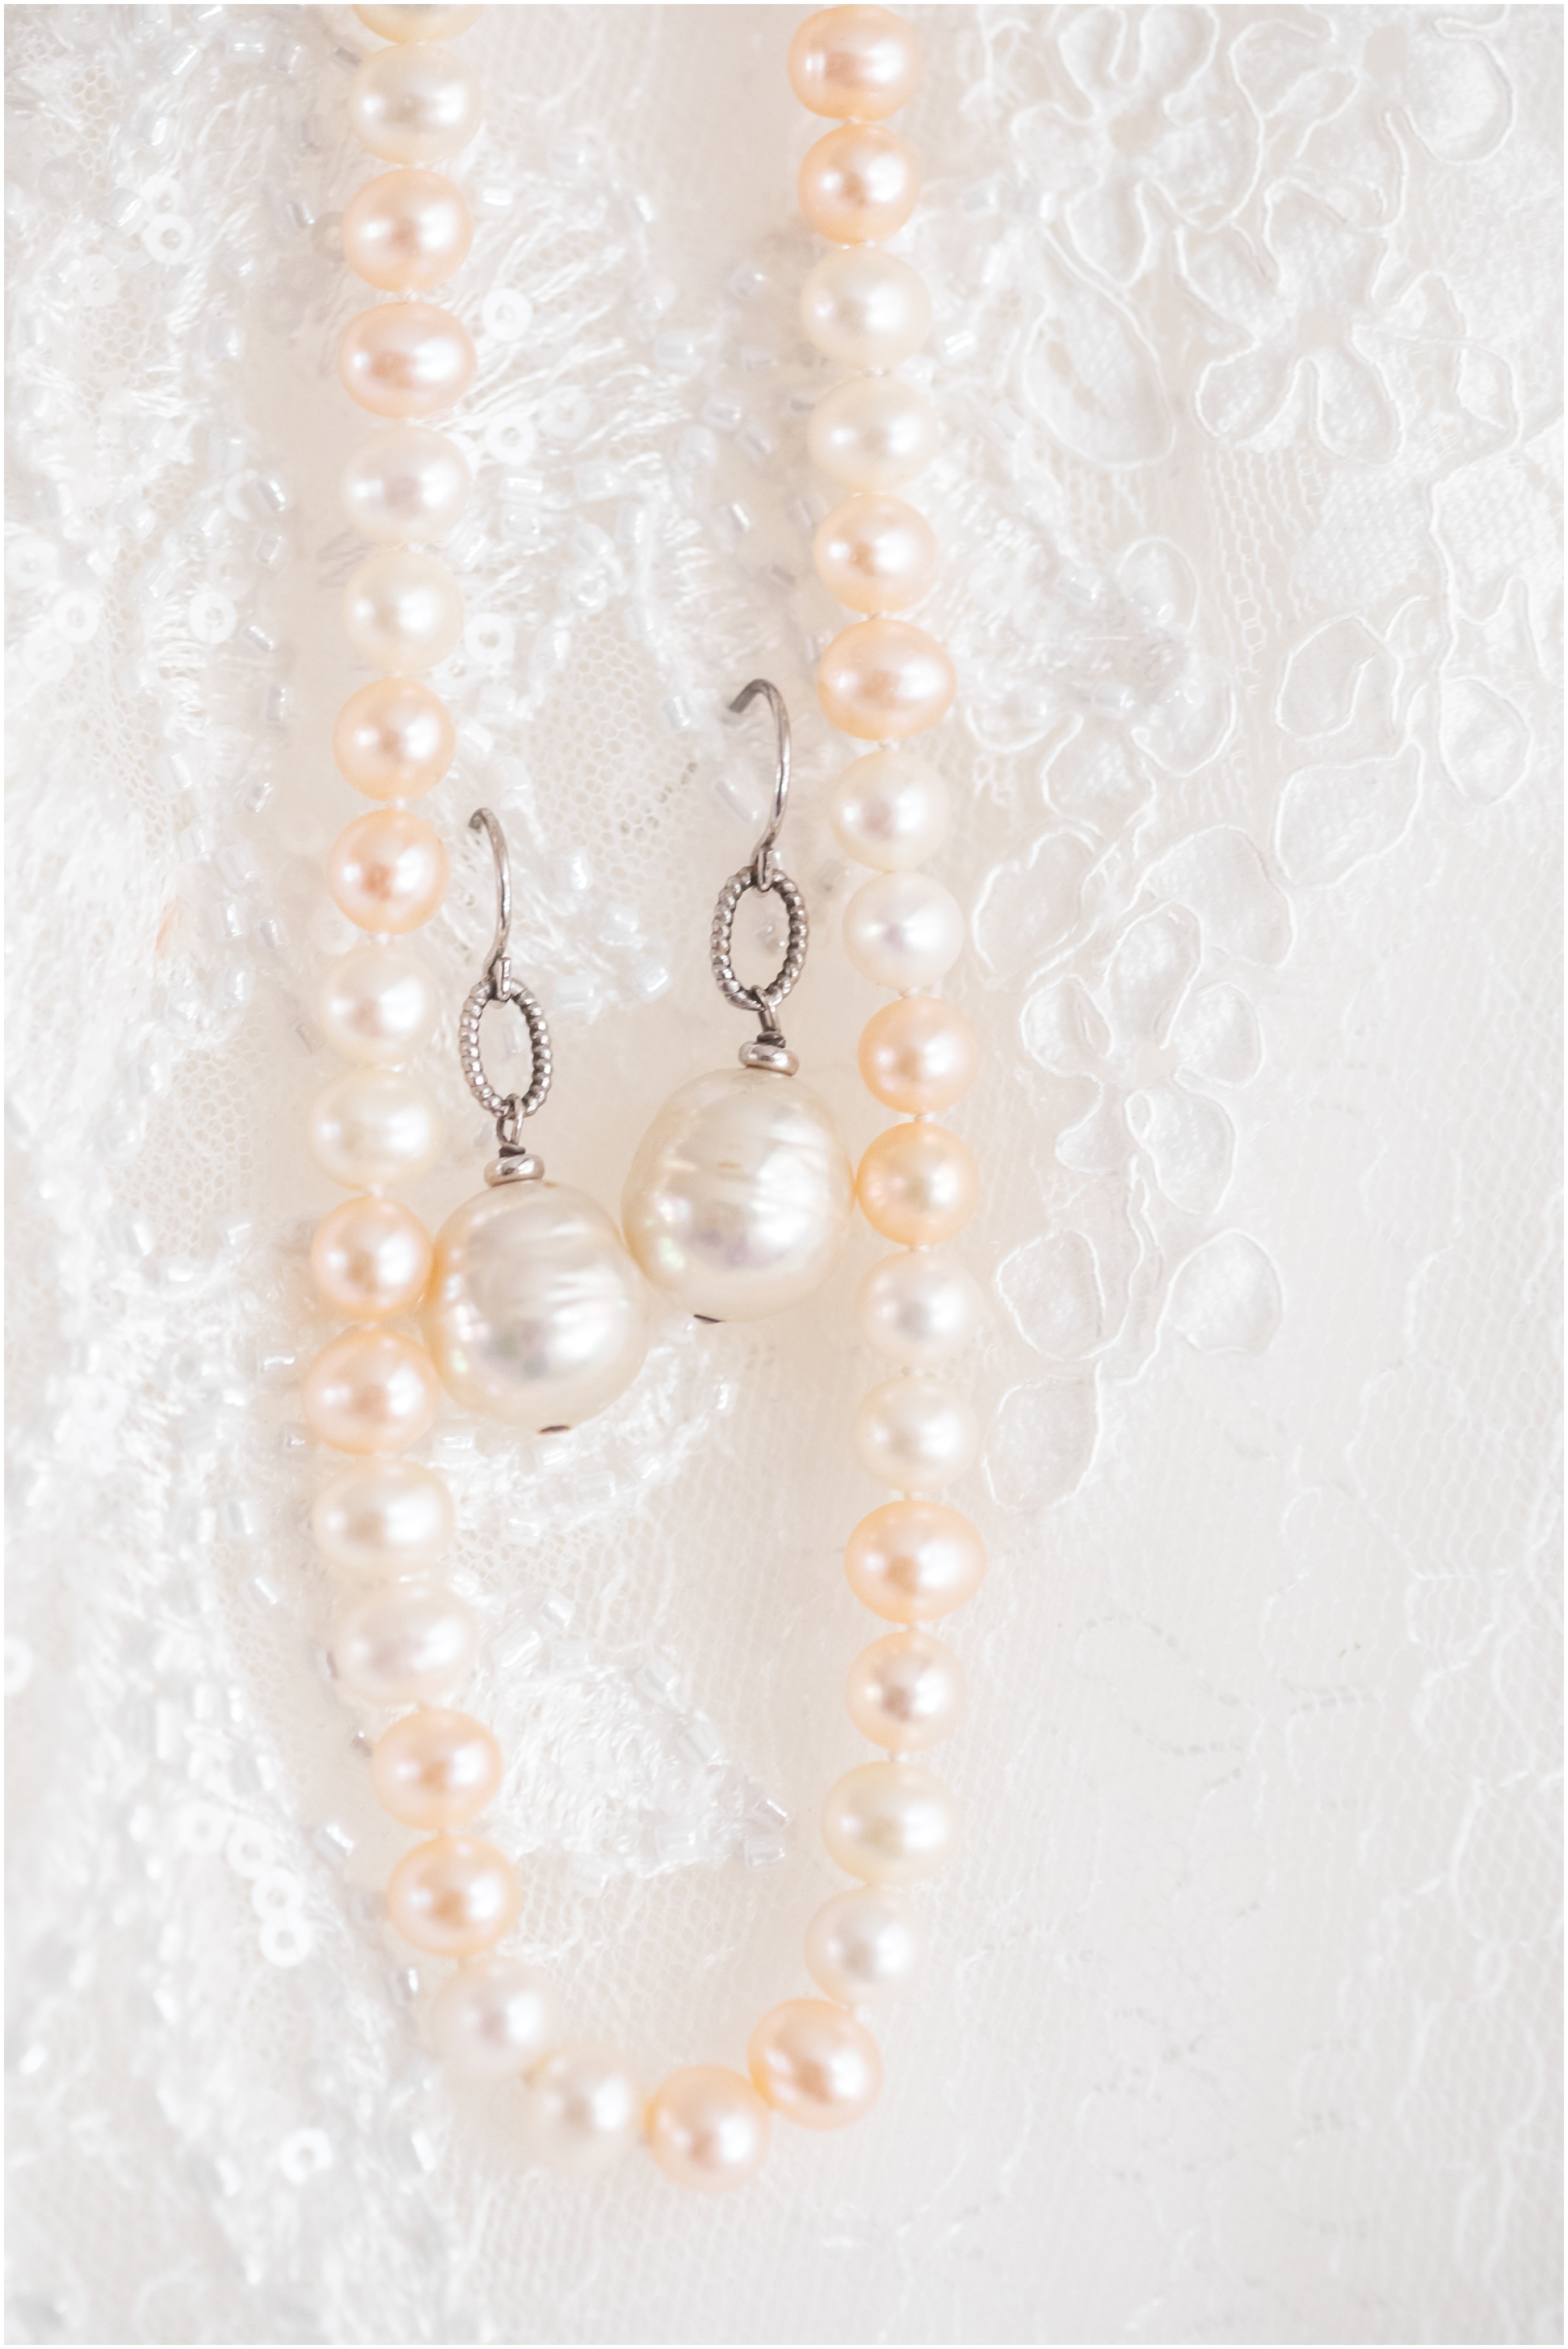 Pearl hanging earrings and pearl knecklace